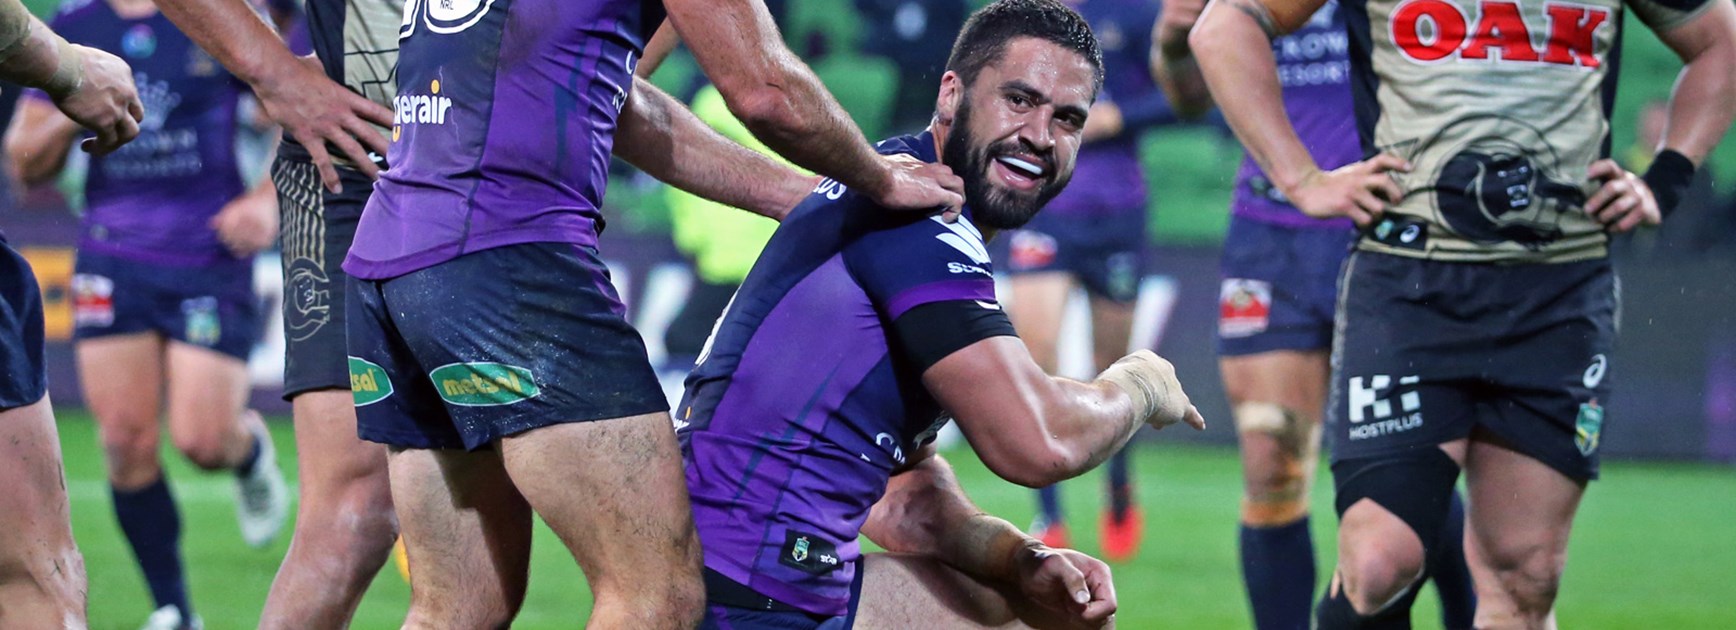 Storm prop Jesse Bromwich scored a try against the Panthers in Round 13.